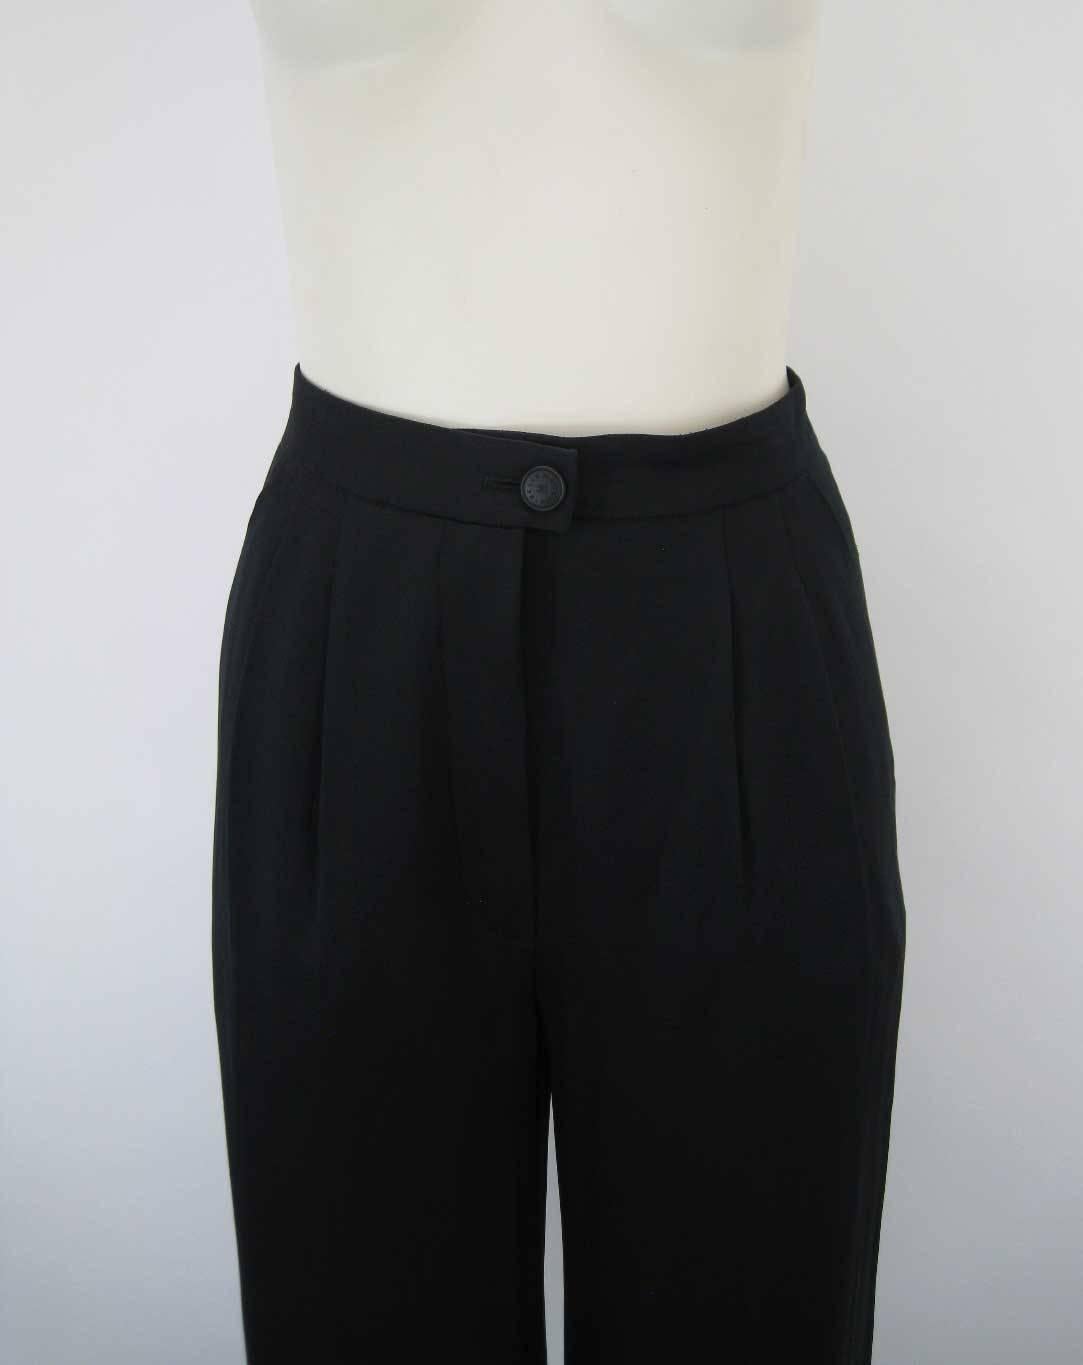 Elegant Chanel black silk cuffed pant.

Flattering cropped length.

Inverted double pleated waist.

Chanel embossed button closure with zipper.

Loose, wider leg with cuff.

Side pockets.

Fabric is silk.

No size tag.

This item is in excellent